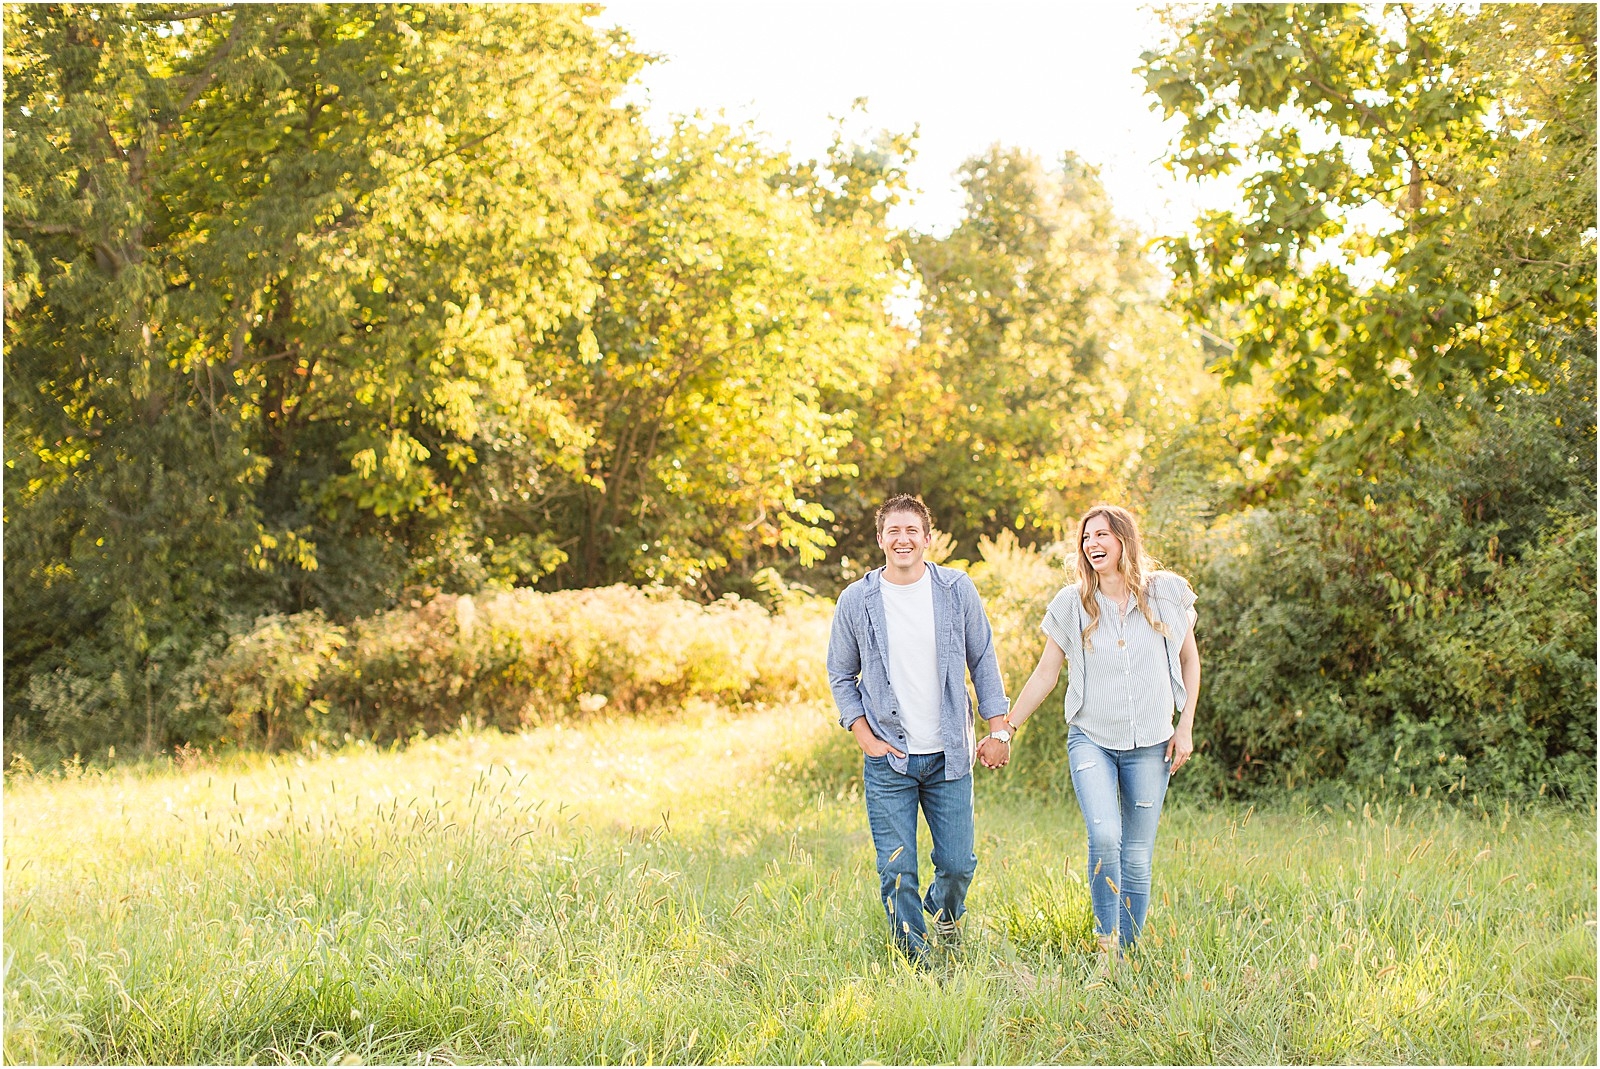 A Jasper Indiana Engagement Session | Tori and Kyle | Bret and Brandie Photography006.jpg